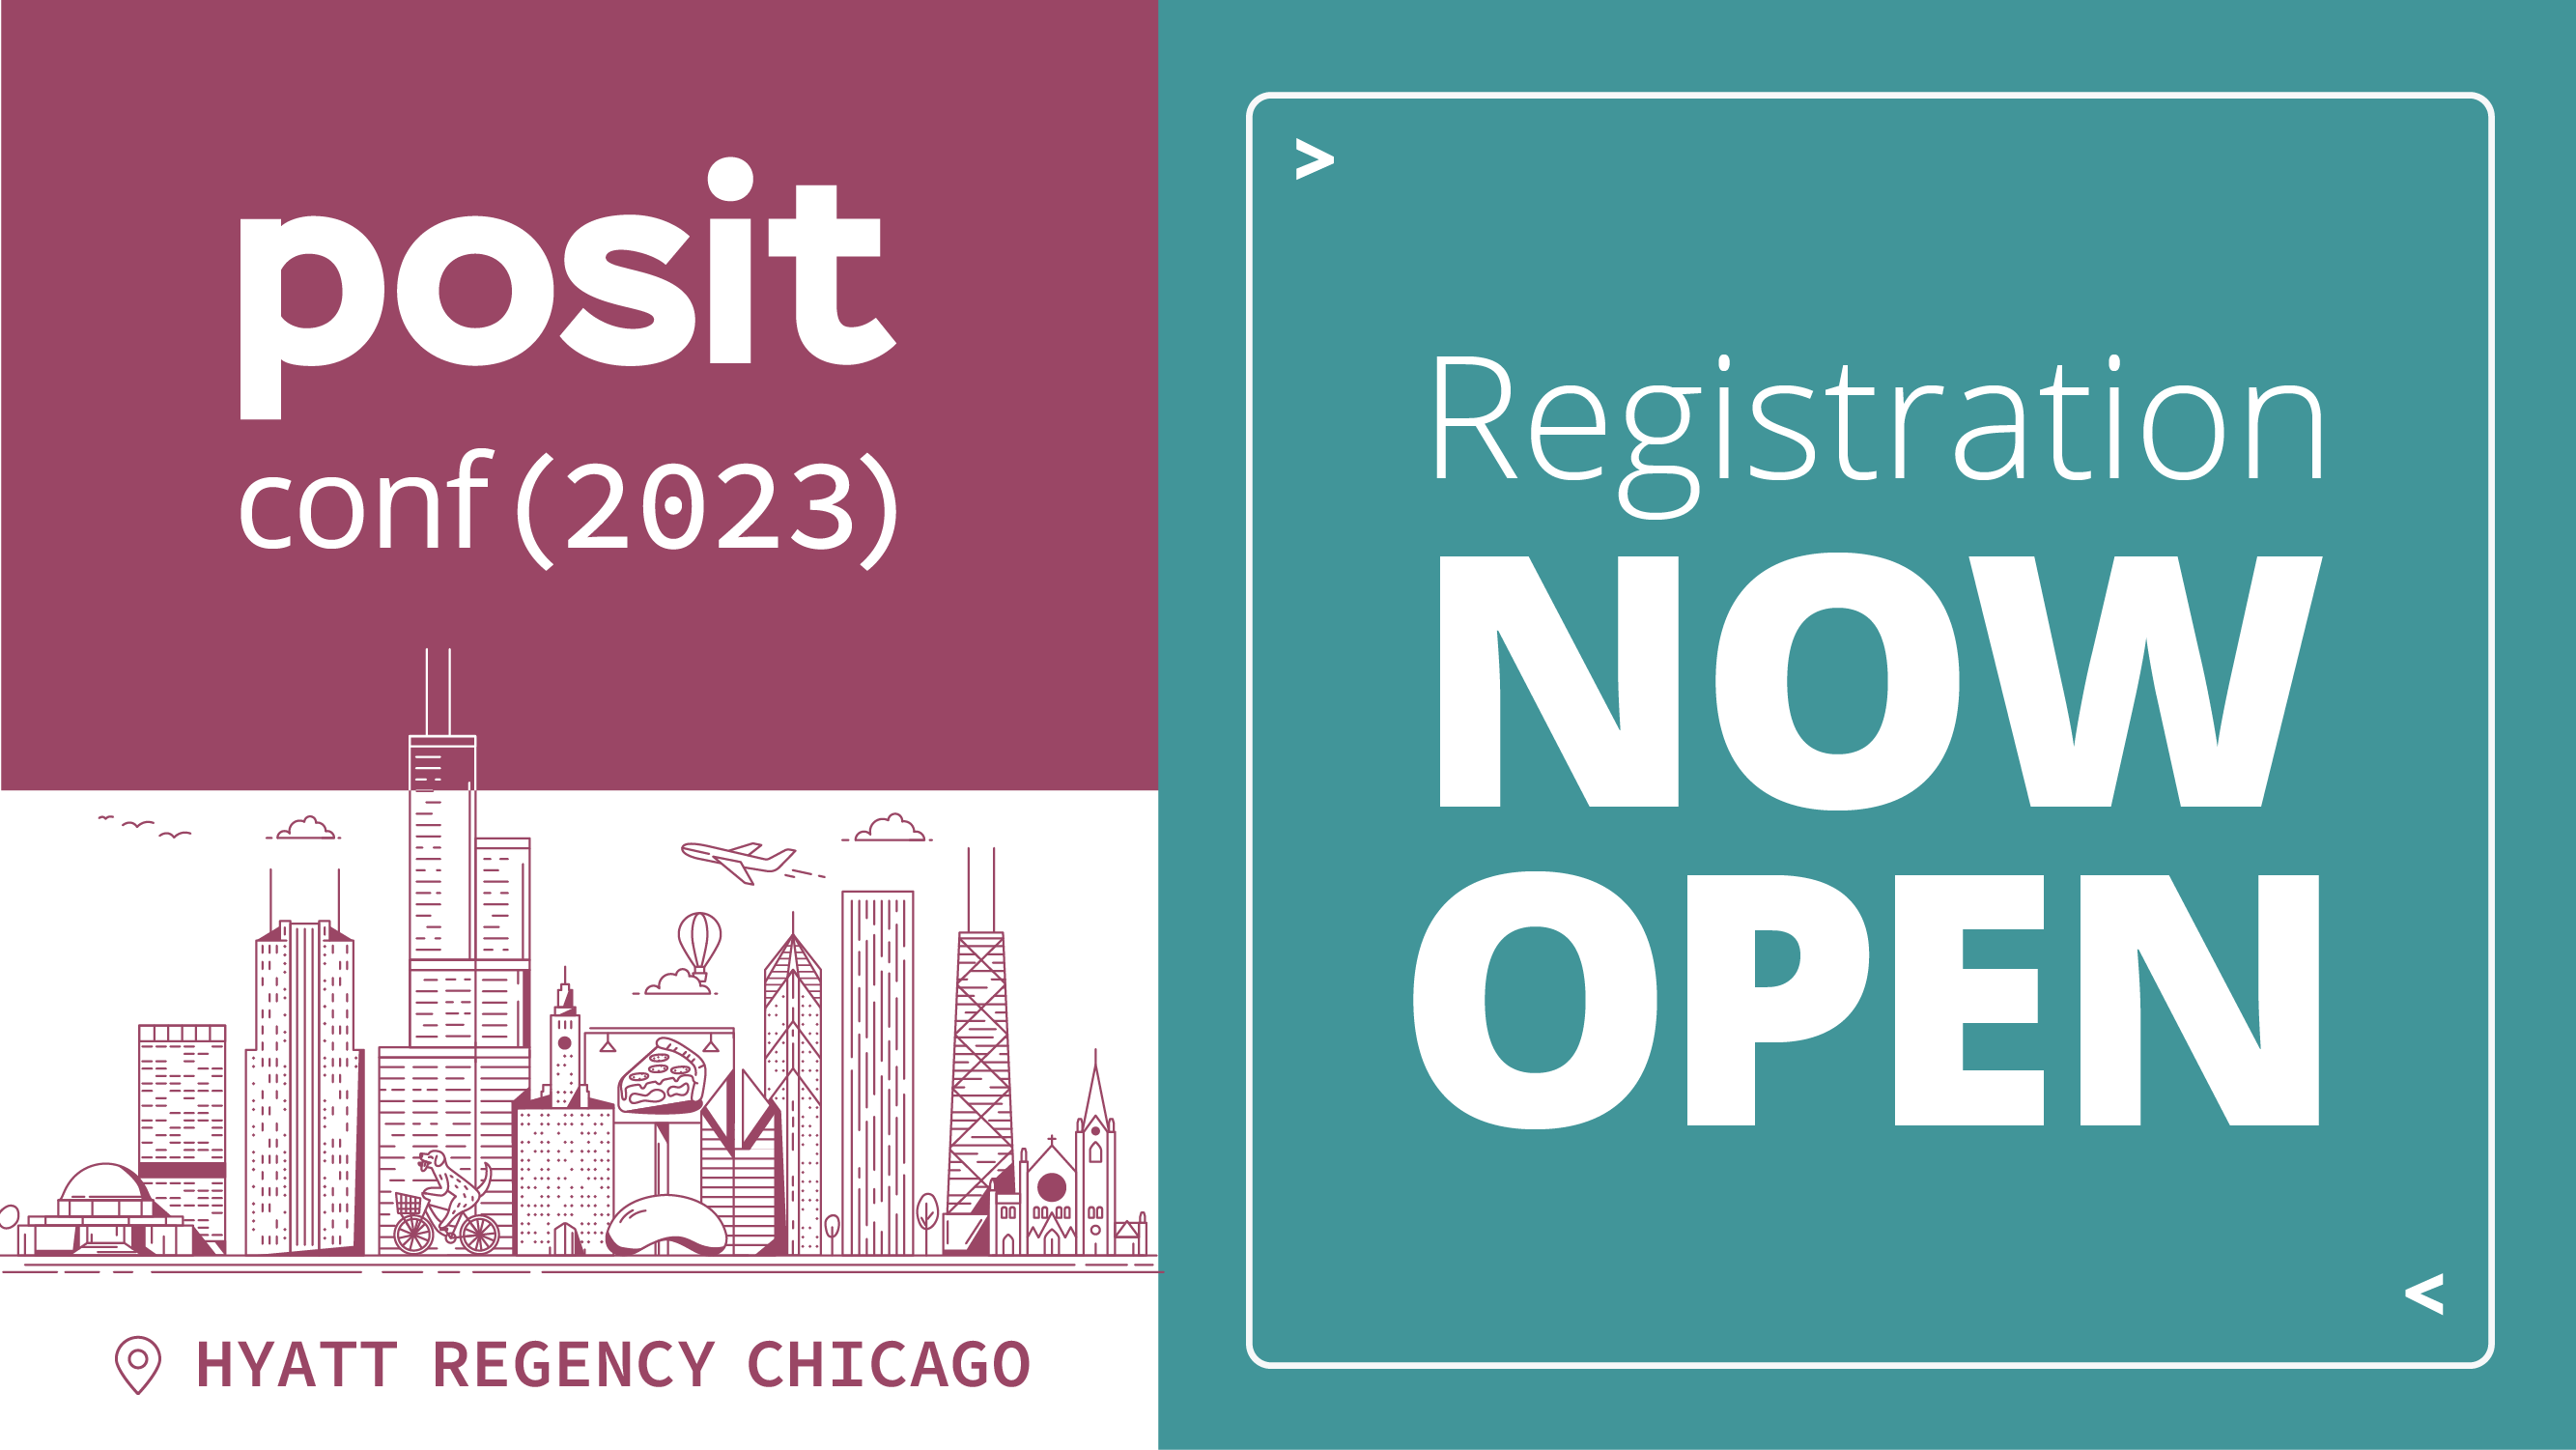 On the left, text that says posit conf 2023. Below is a cartoon outline of the Chicago skyline and the text Hyatt Regency Chicago. On the right, text that says Registration Now Open.